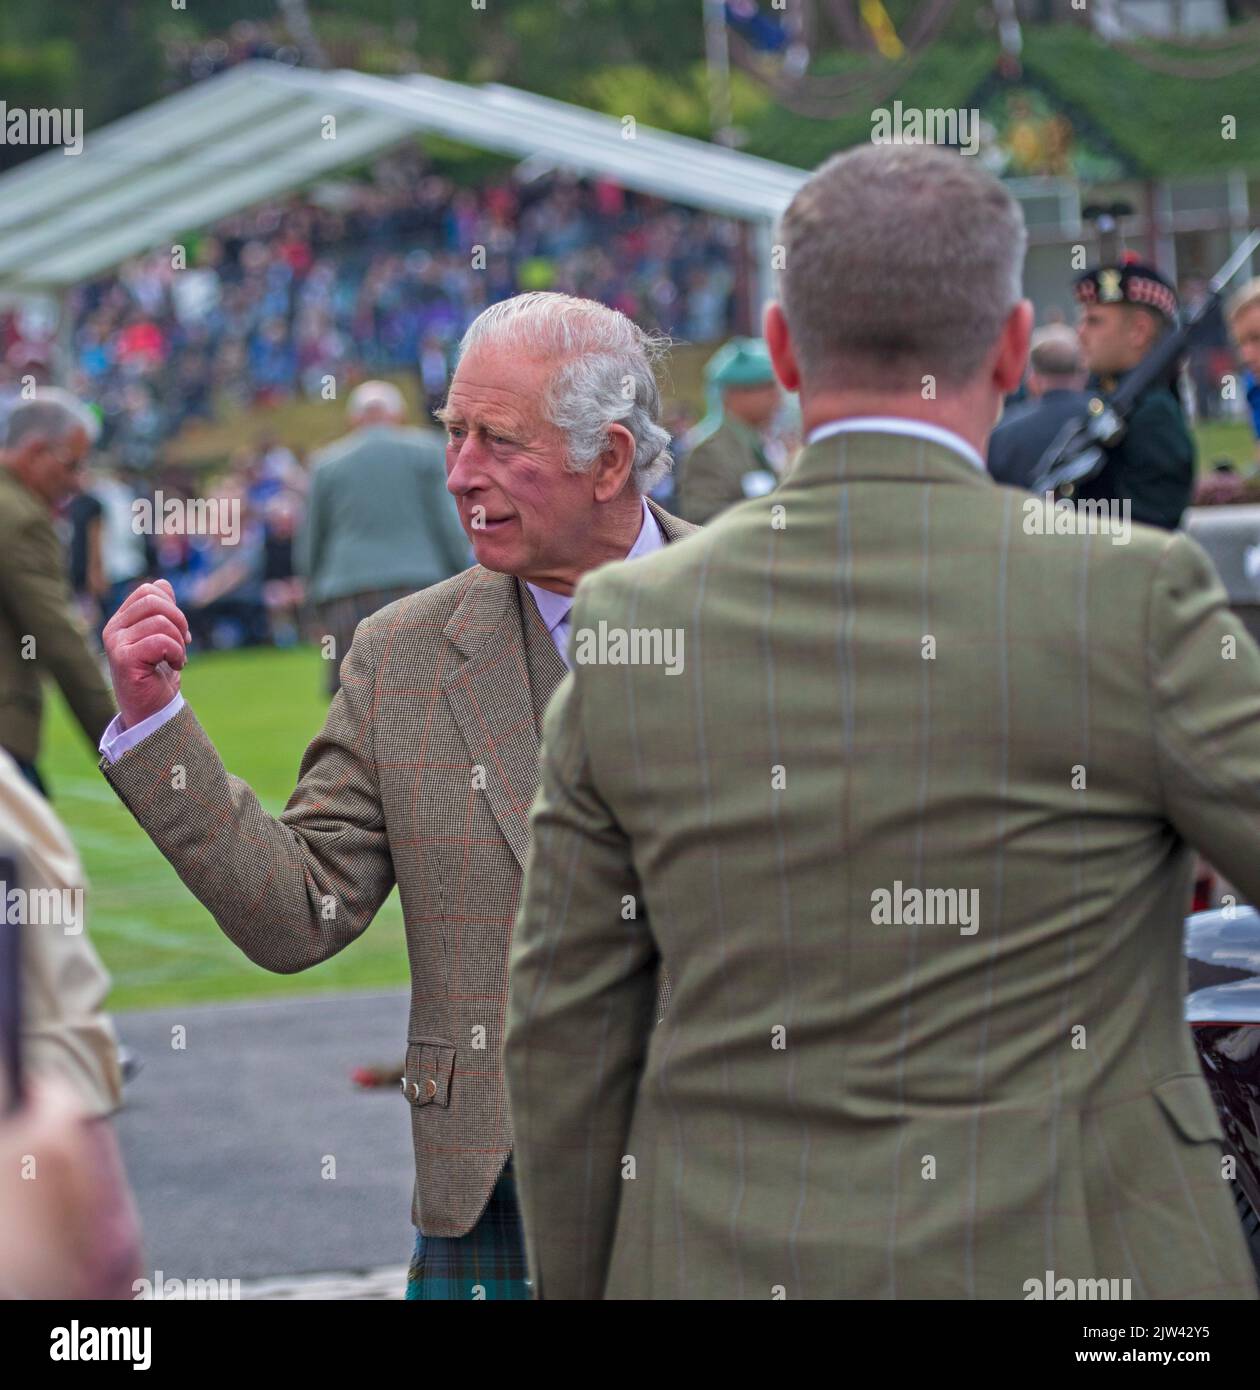 Braemar, Aberdeenshire Scotland, UK. 3rd September 2022. Braemar Royal Highland Gathering 2022. Mass Pipe Bands and highland games kept a capacity audience entertained on a dull day but dry. Pictured Prince Charles Prince of Wales, Duke of Rothesay Stock Photo